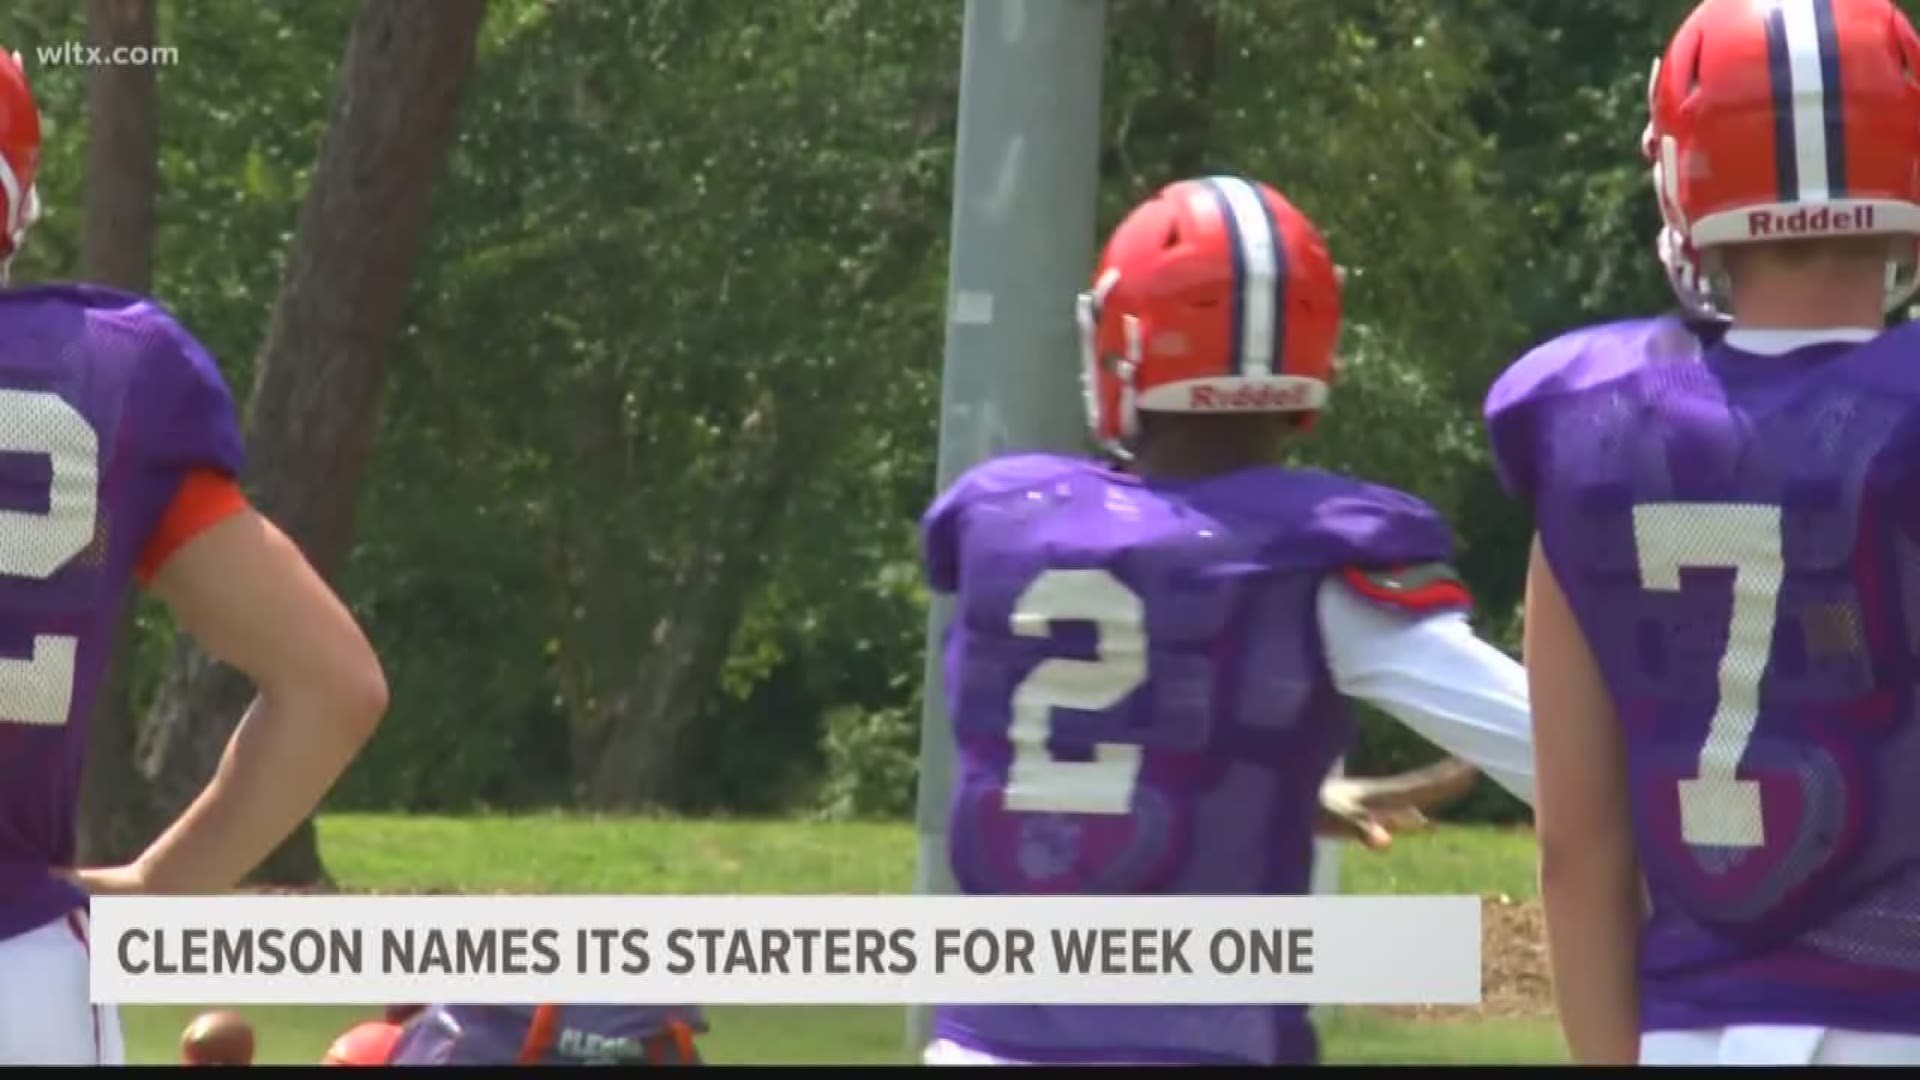 Clemson quarterback Kelly Bryant talks about being named the starting quarterback for the Tigers' season opener against Furman.